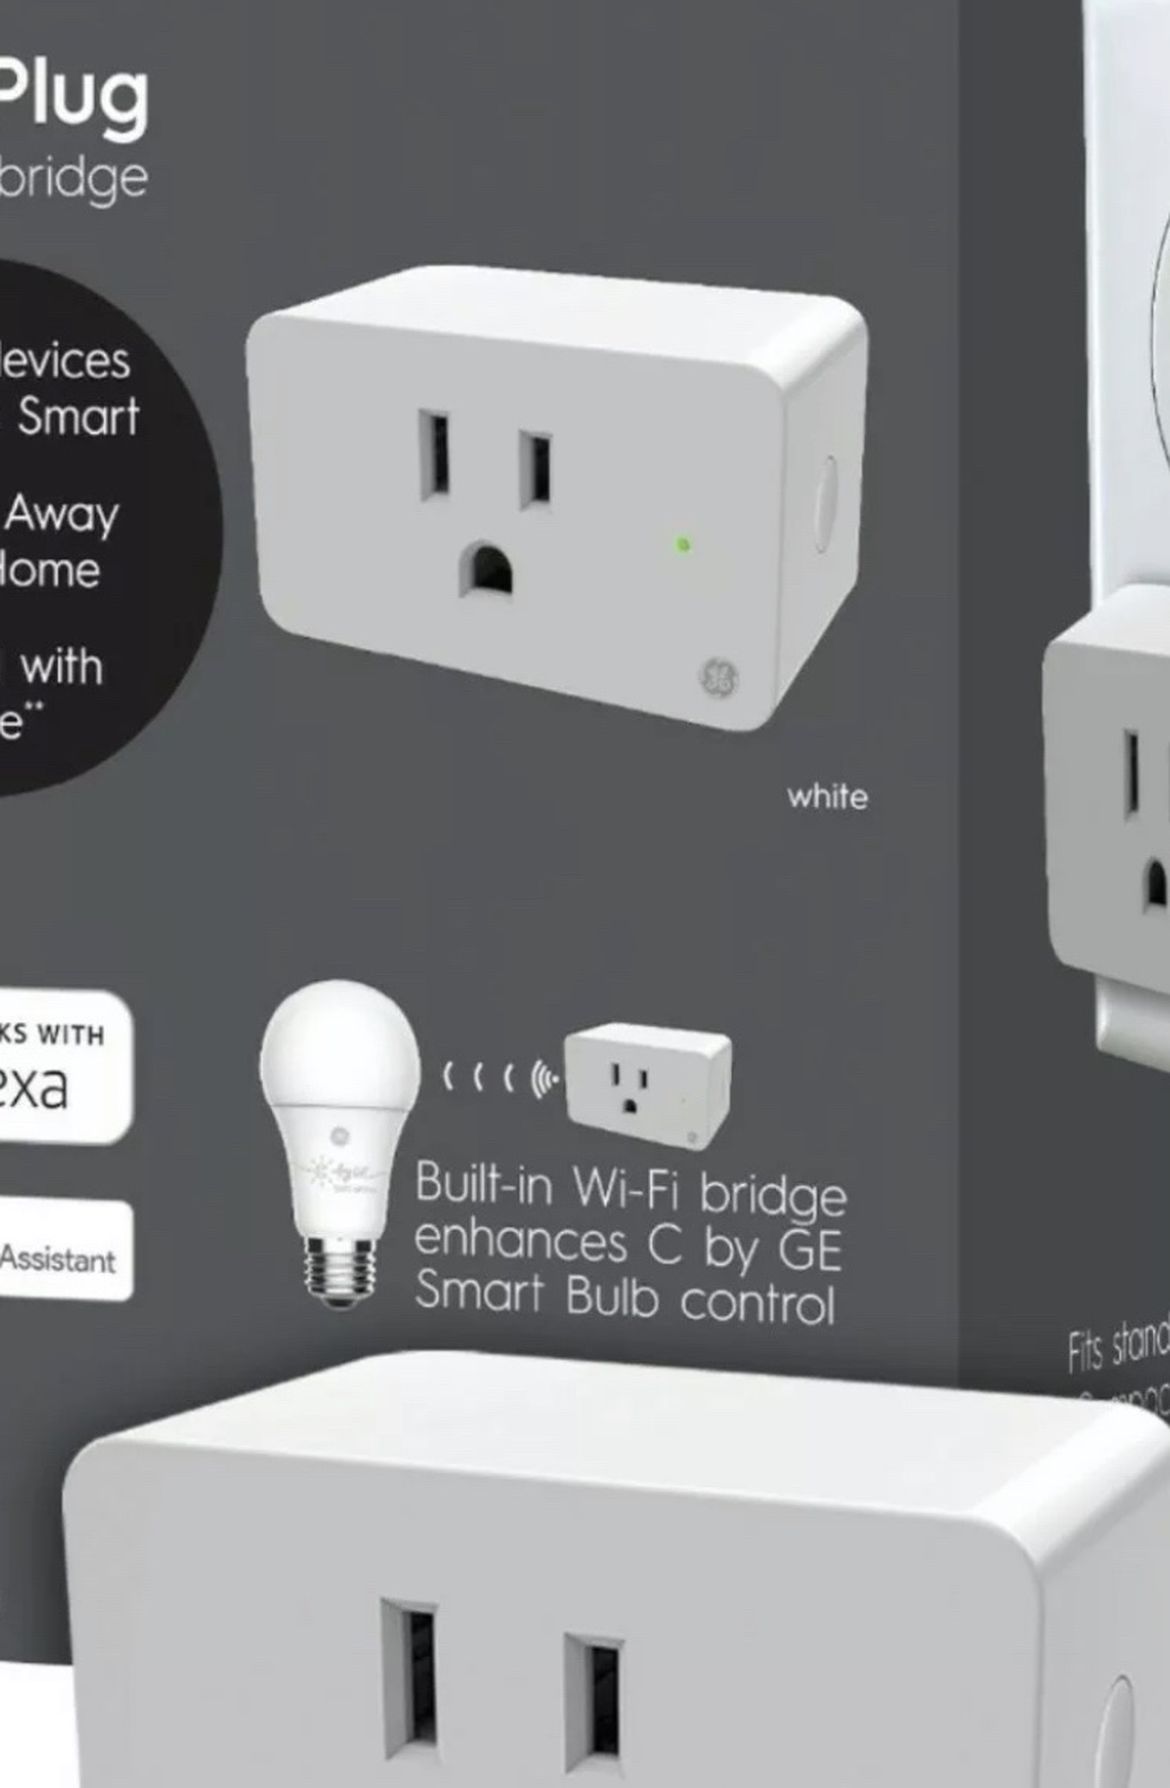 C by GE Smart Plug with Smart Bridge, White, On/Off Smart Plugs that work with